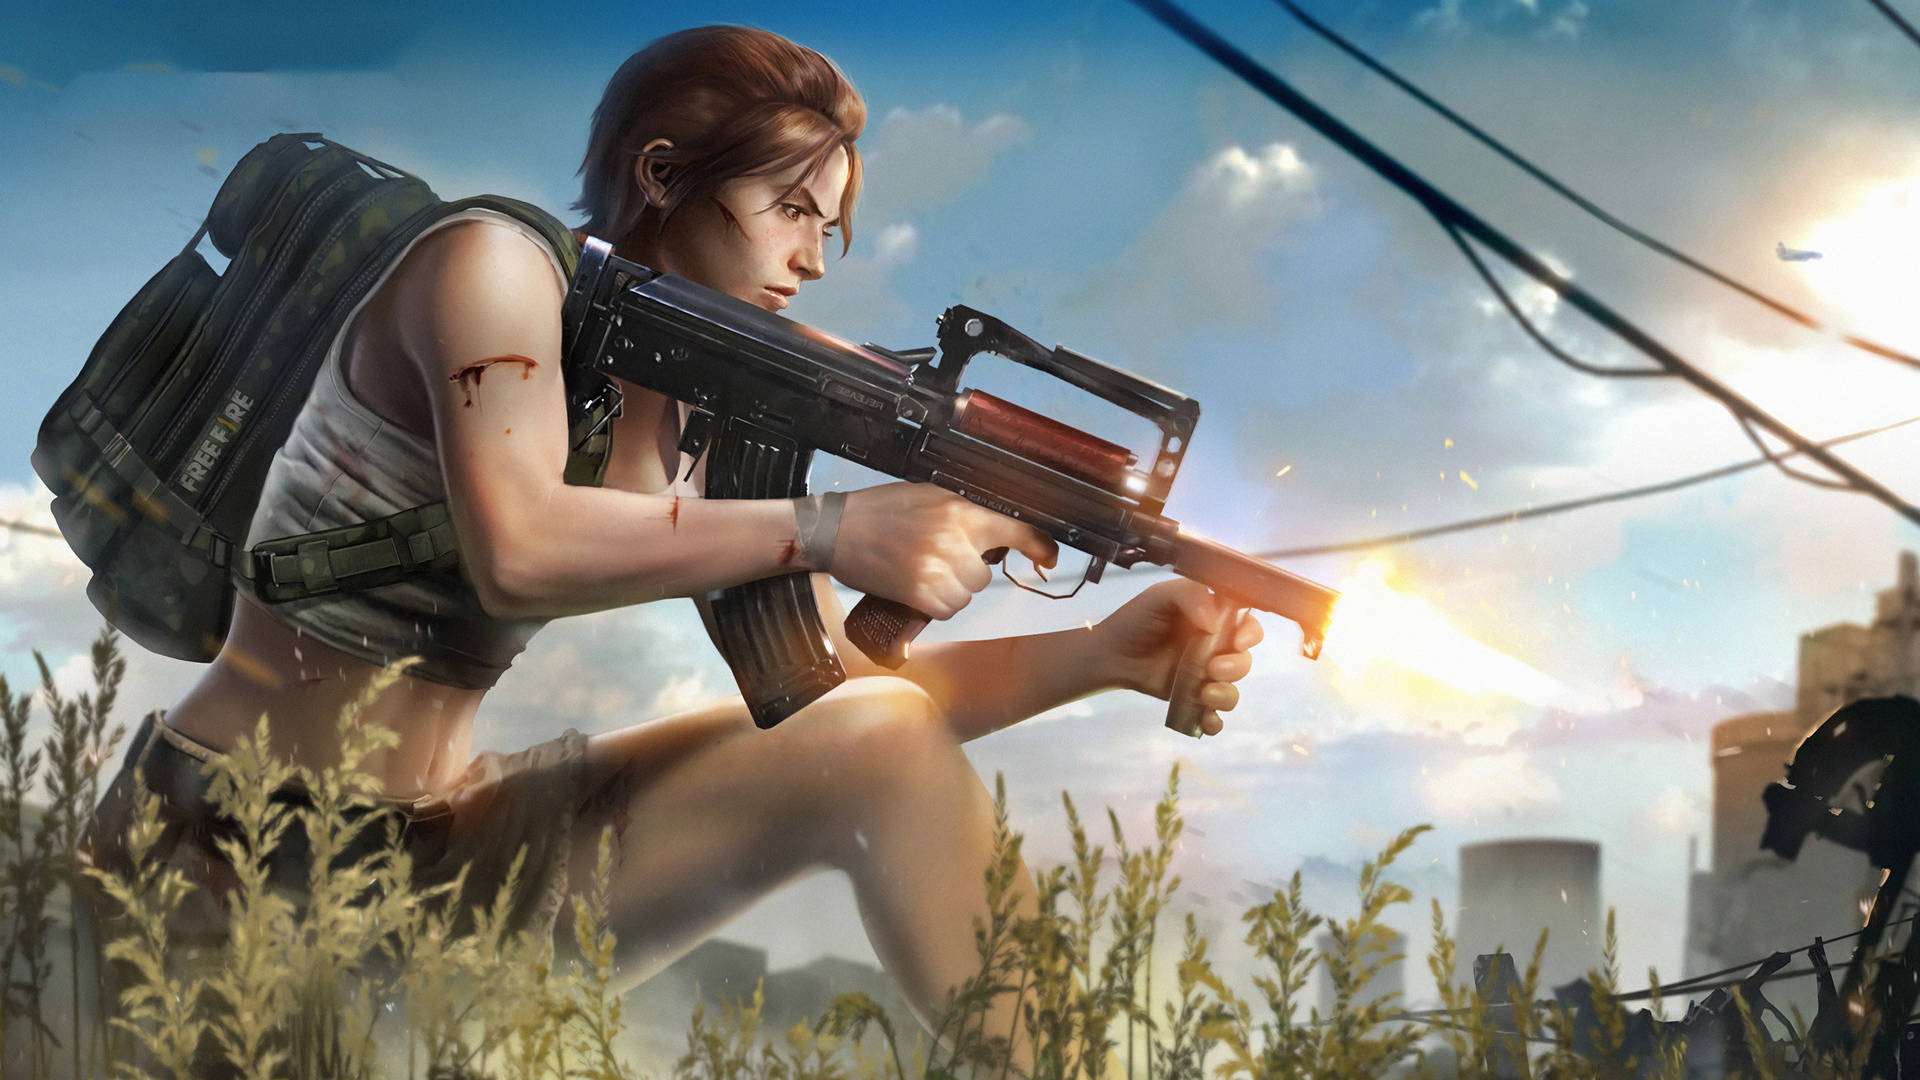 Female Character Free Fire 2020 Background